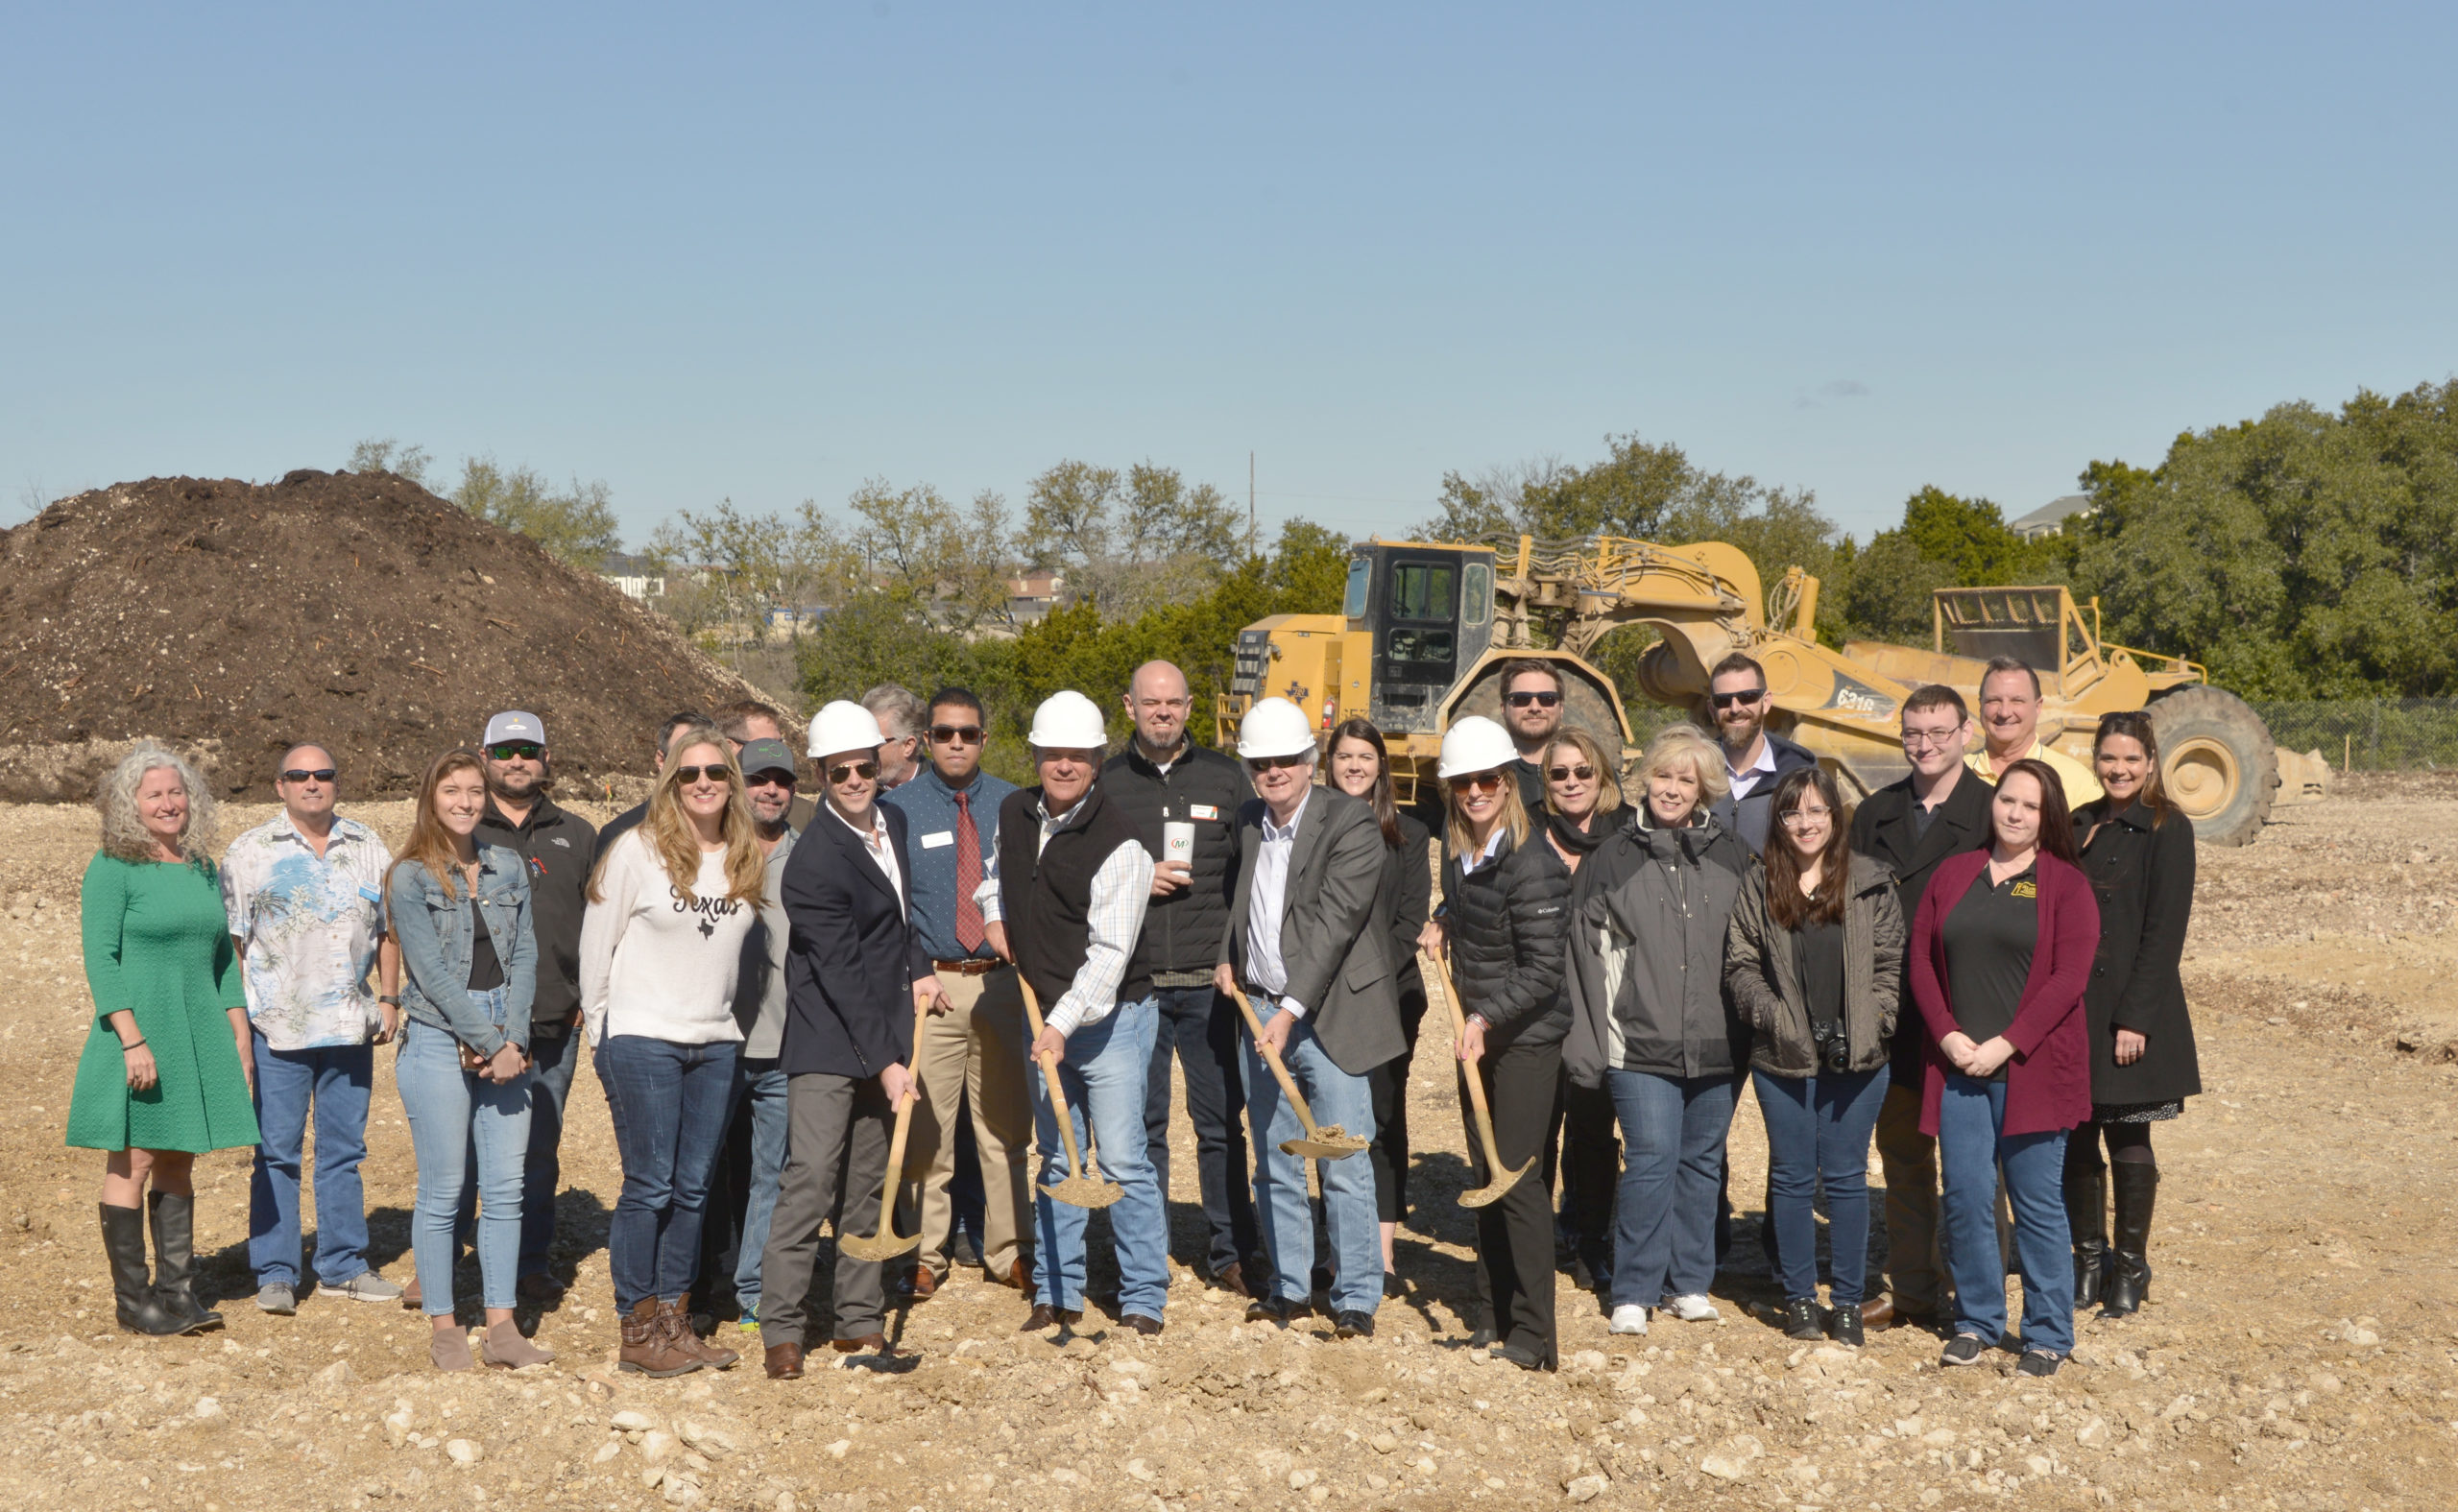 Construction crew during the groundbreaking of South Street Villas in Leander TX.